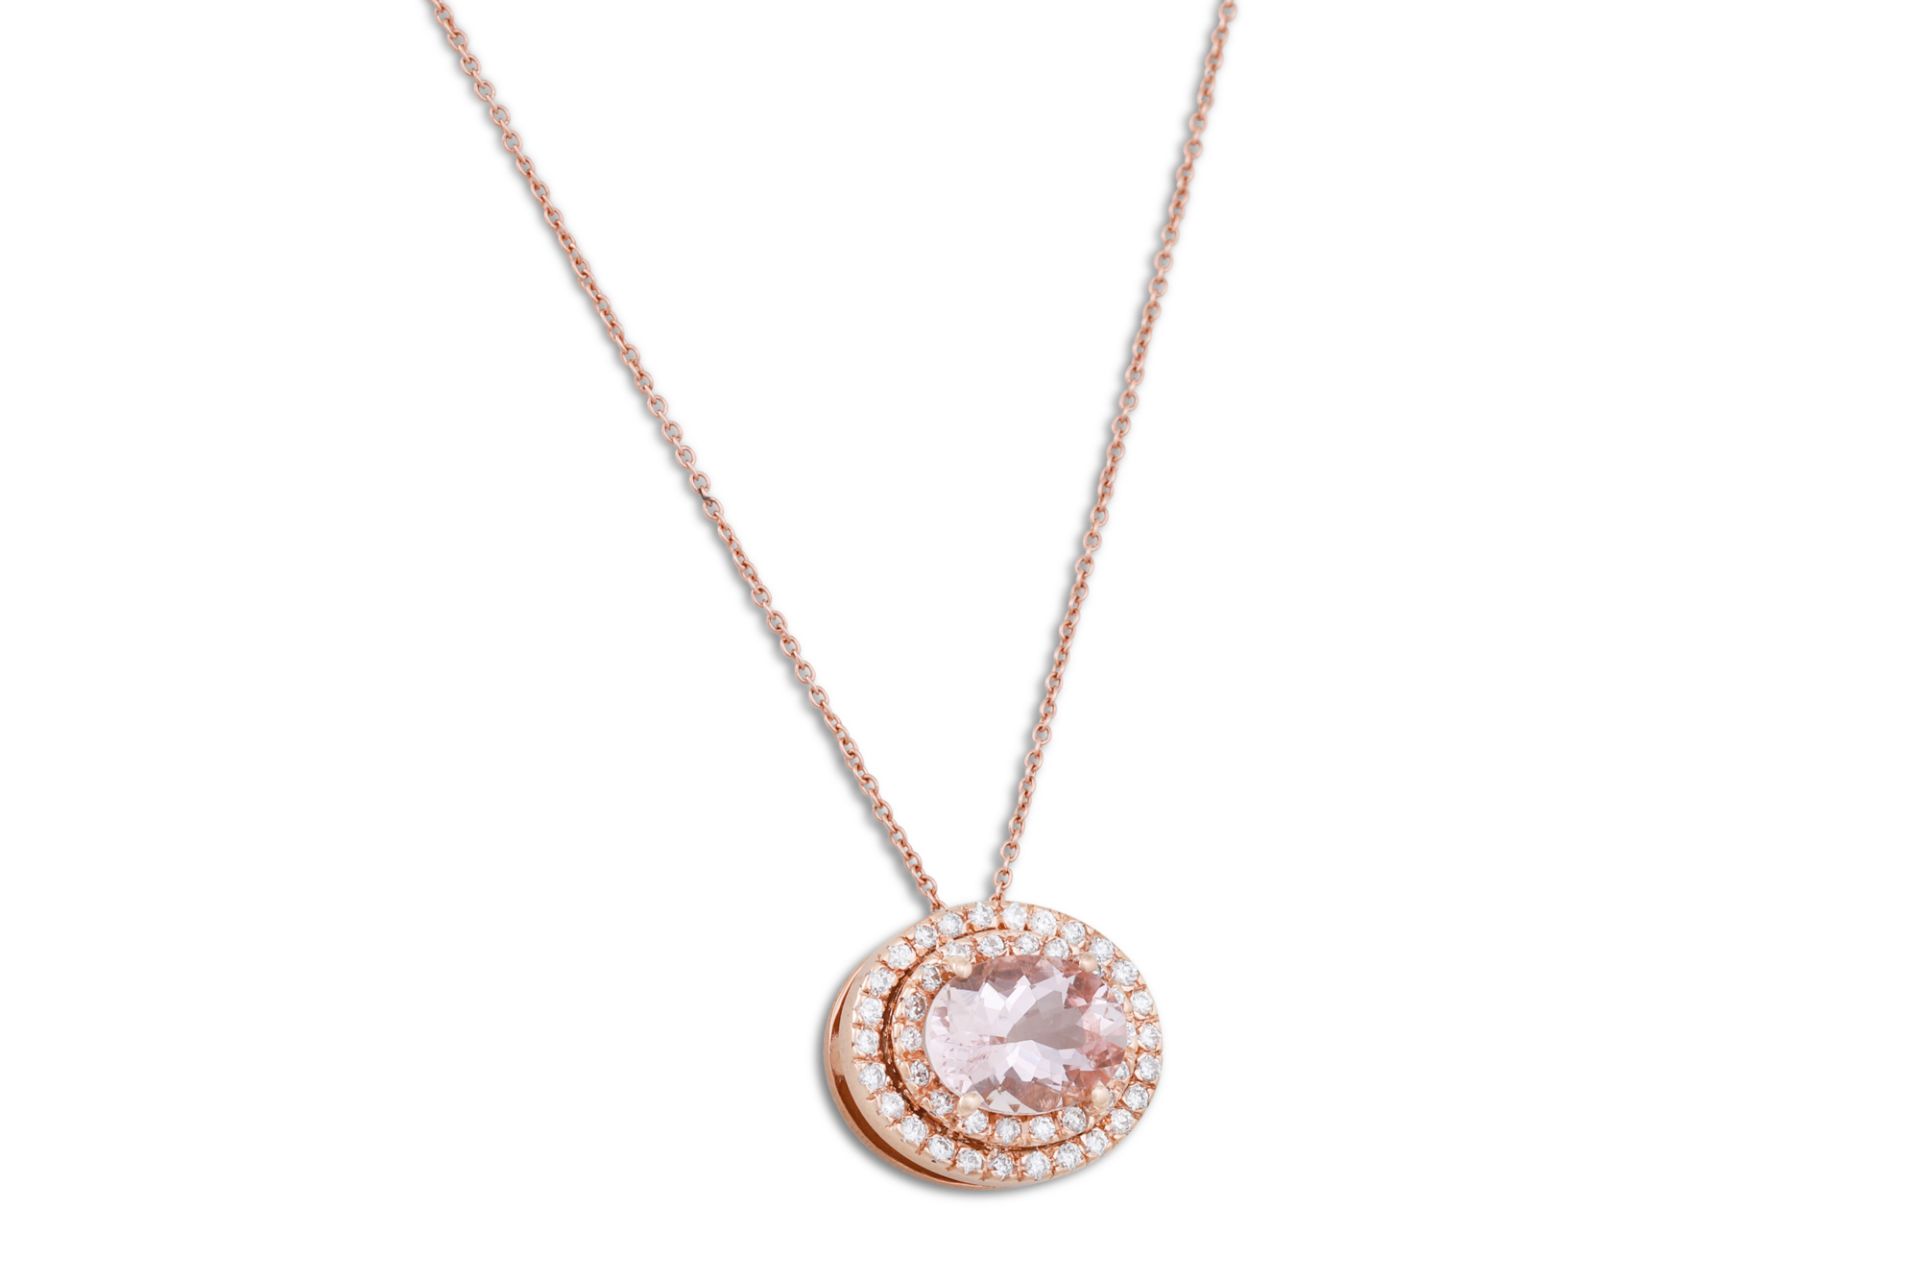 A MORGANITE AND DIAMOND CLUSTER PENDANT, of oval form, mounted in pink gold, on a pink gold chain.